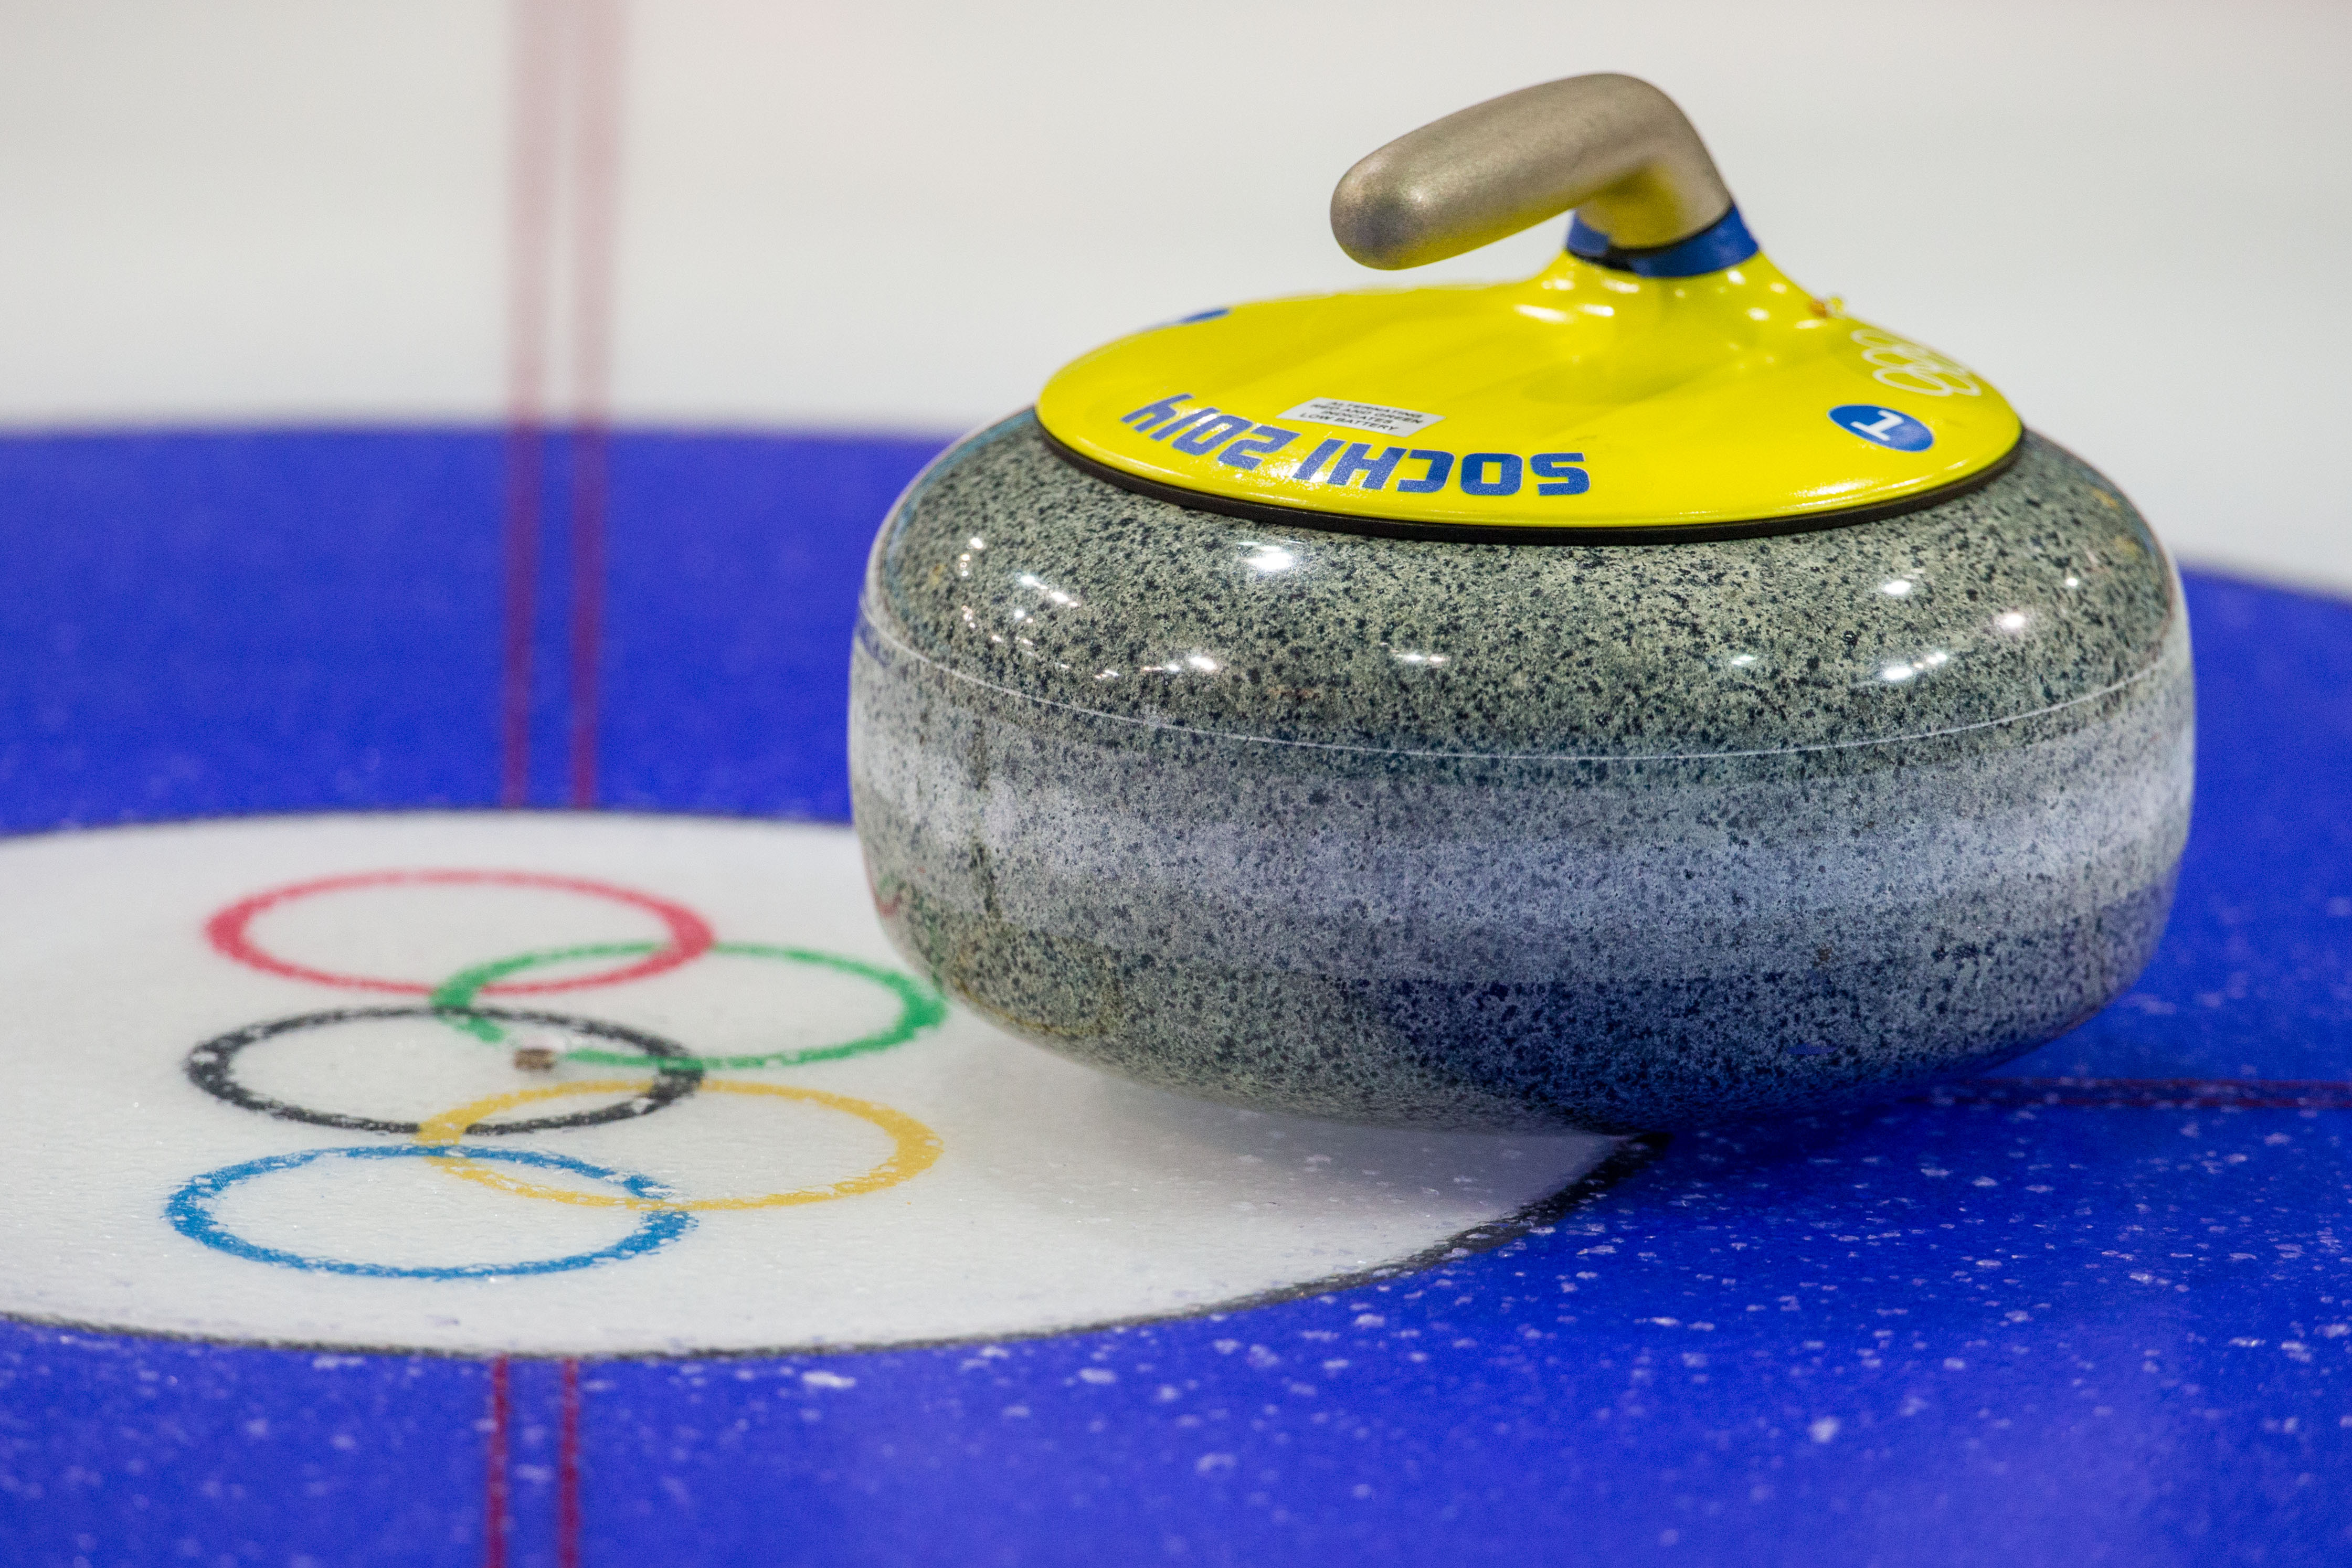  Stone For Curling At The Olympics In Sochi 065340  